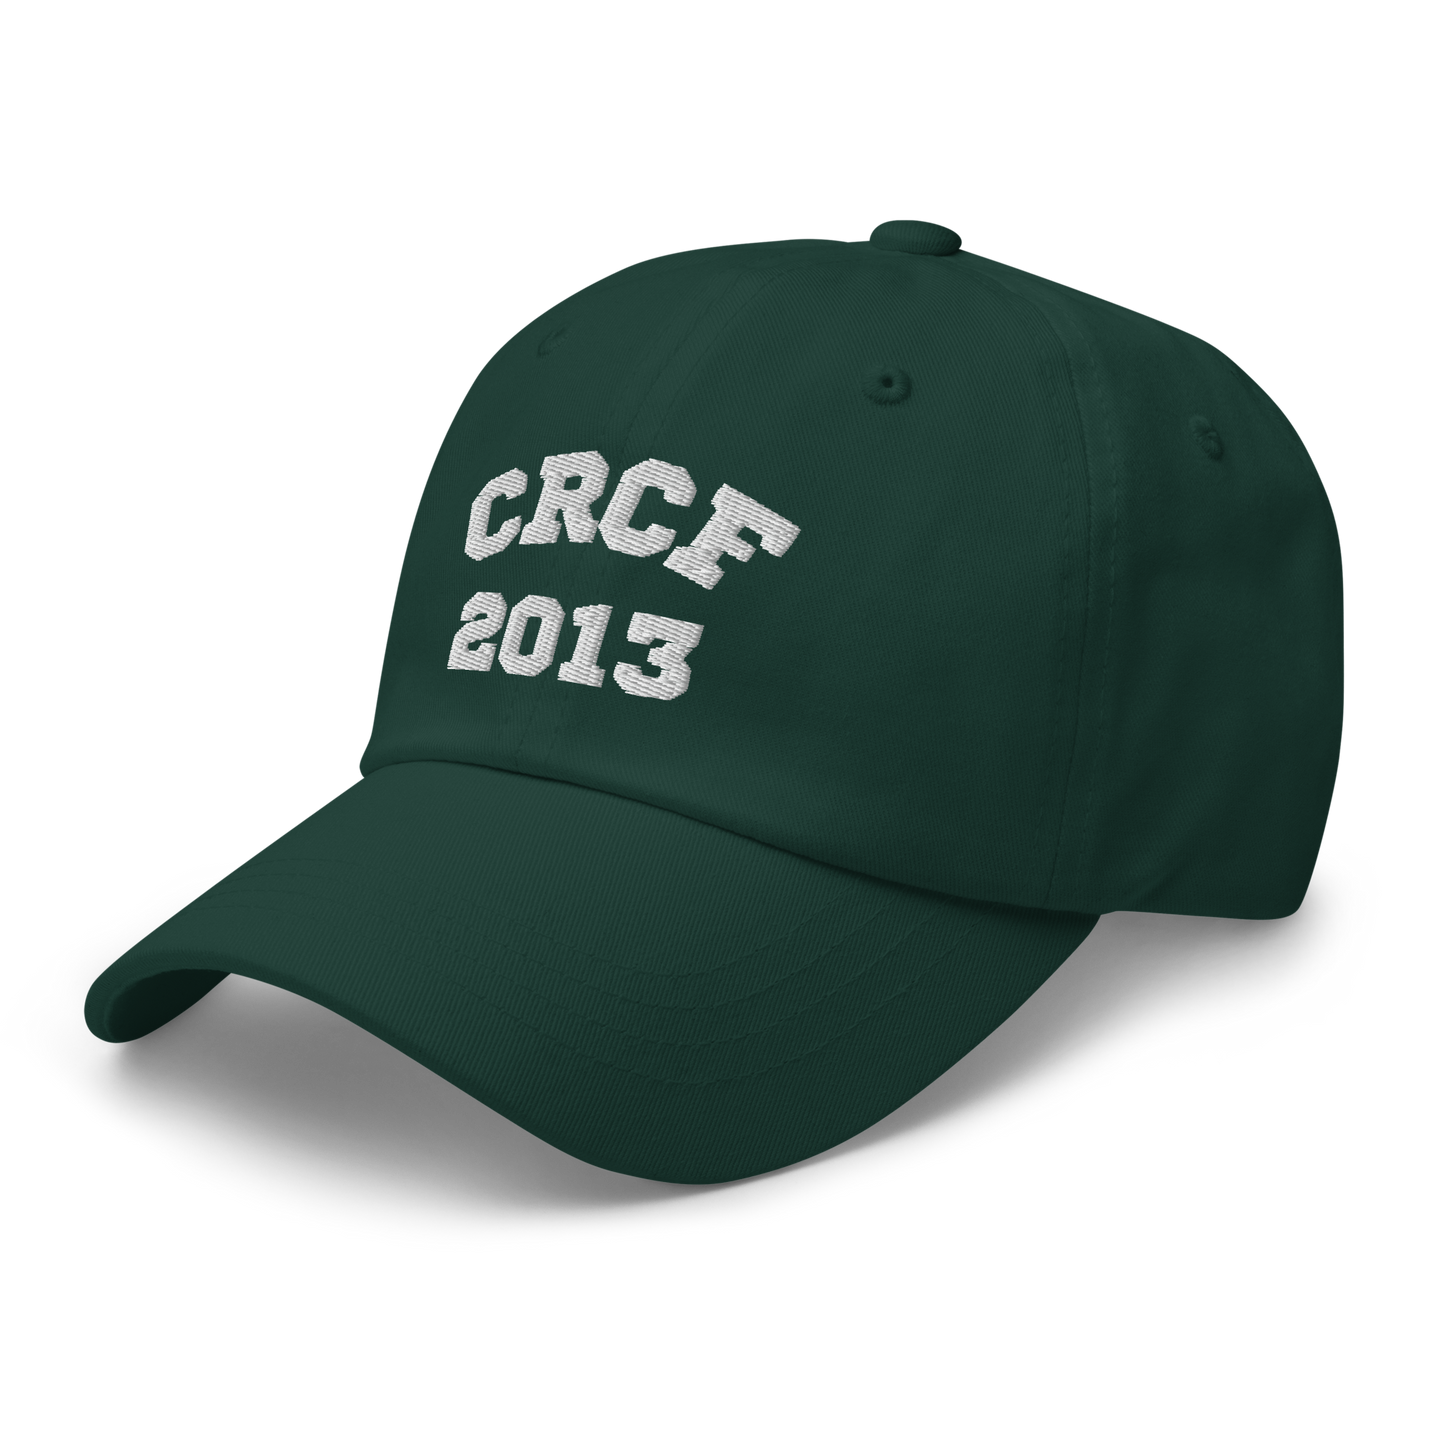 COACHES PRICING of CRCF Dad hat